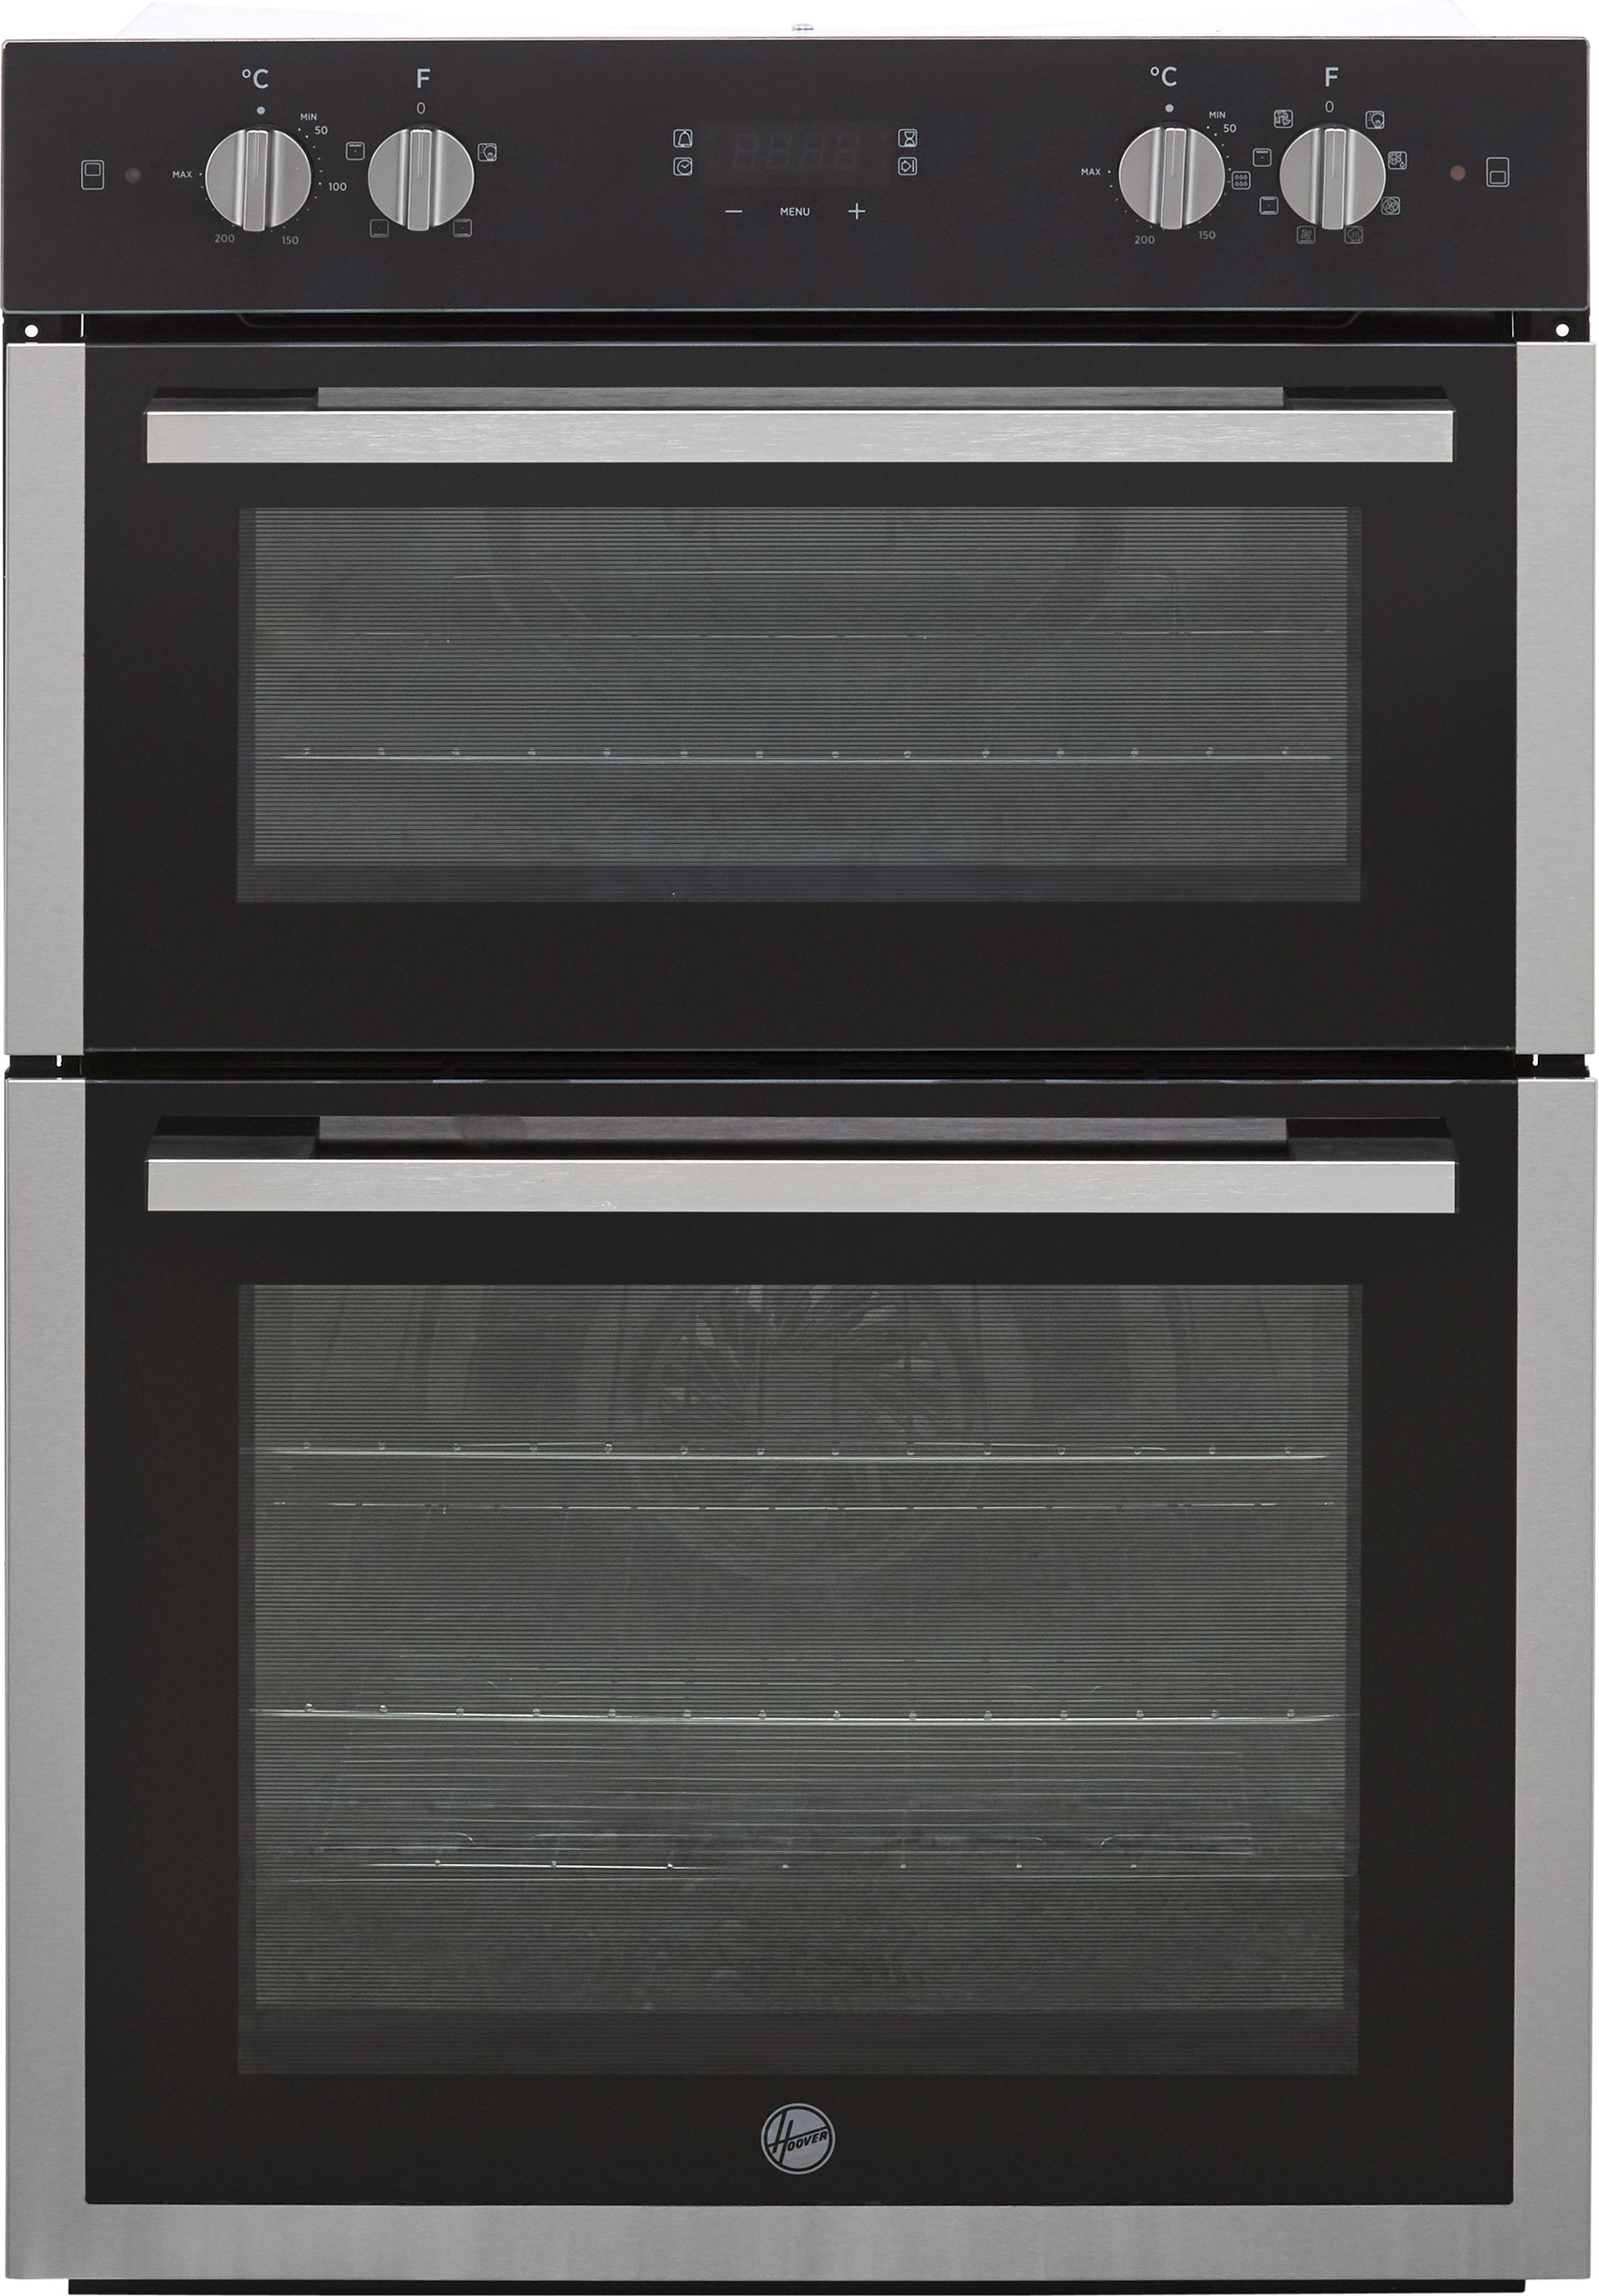 Hoover H-OVEN 300 HO9DC3UB308BI Built In Electric Double Oven - Black / Stainless Steel - A/A Rated, Black